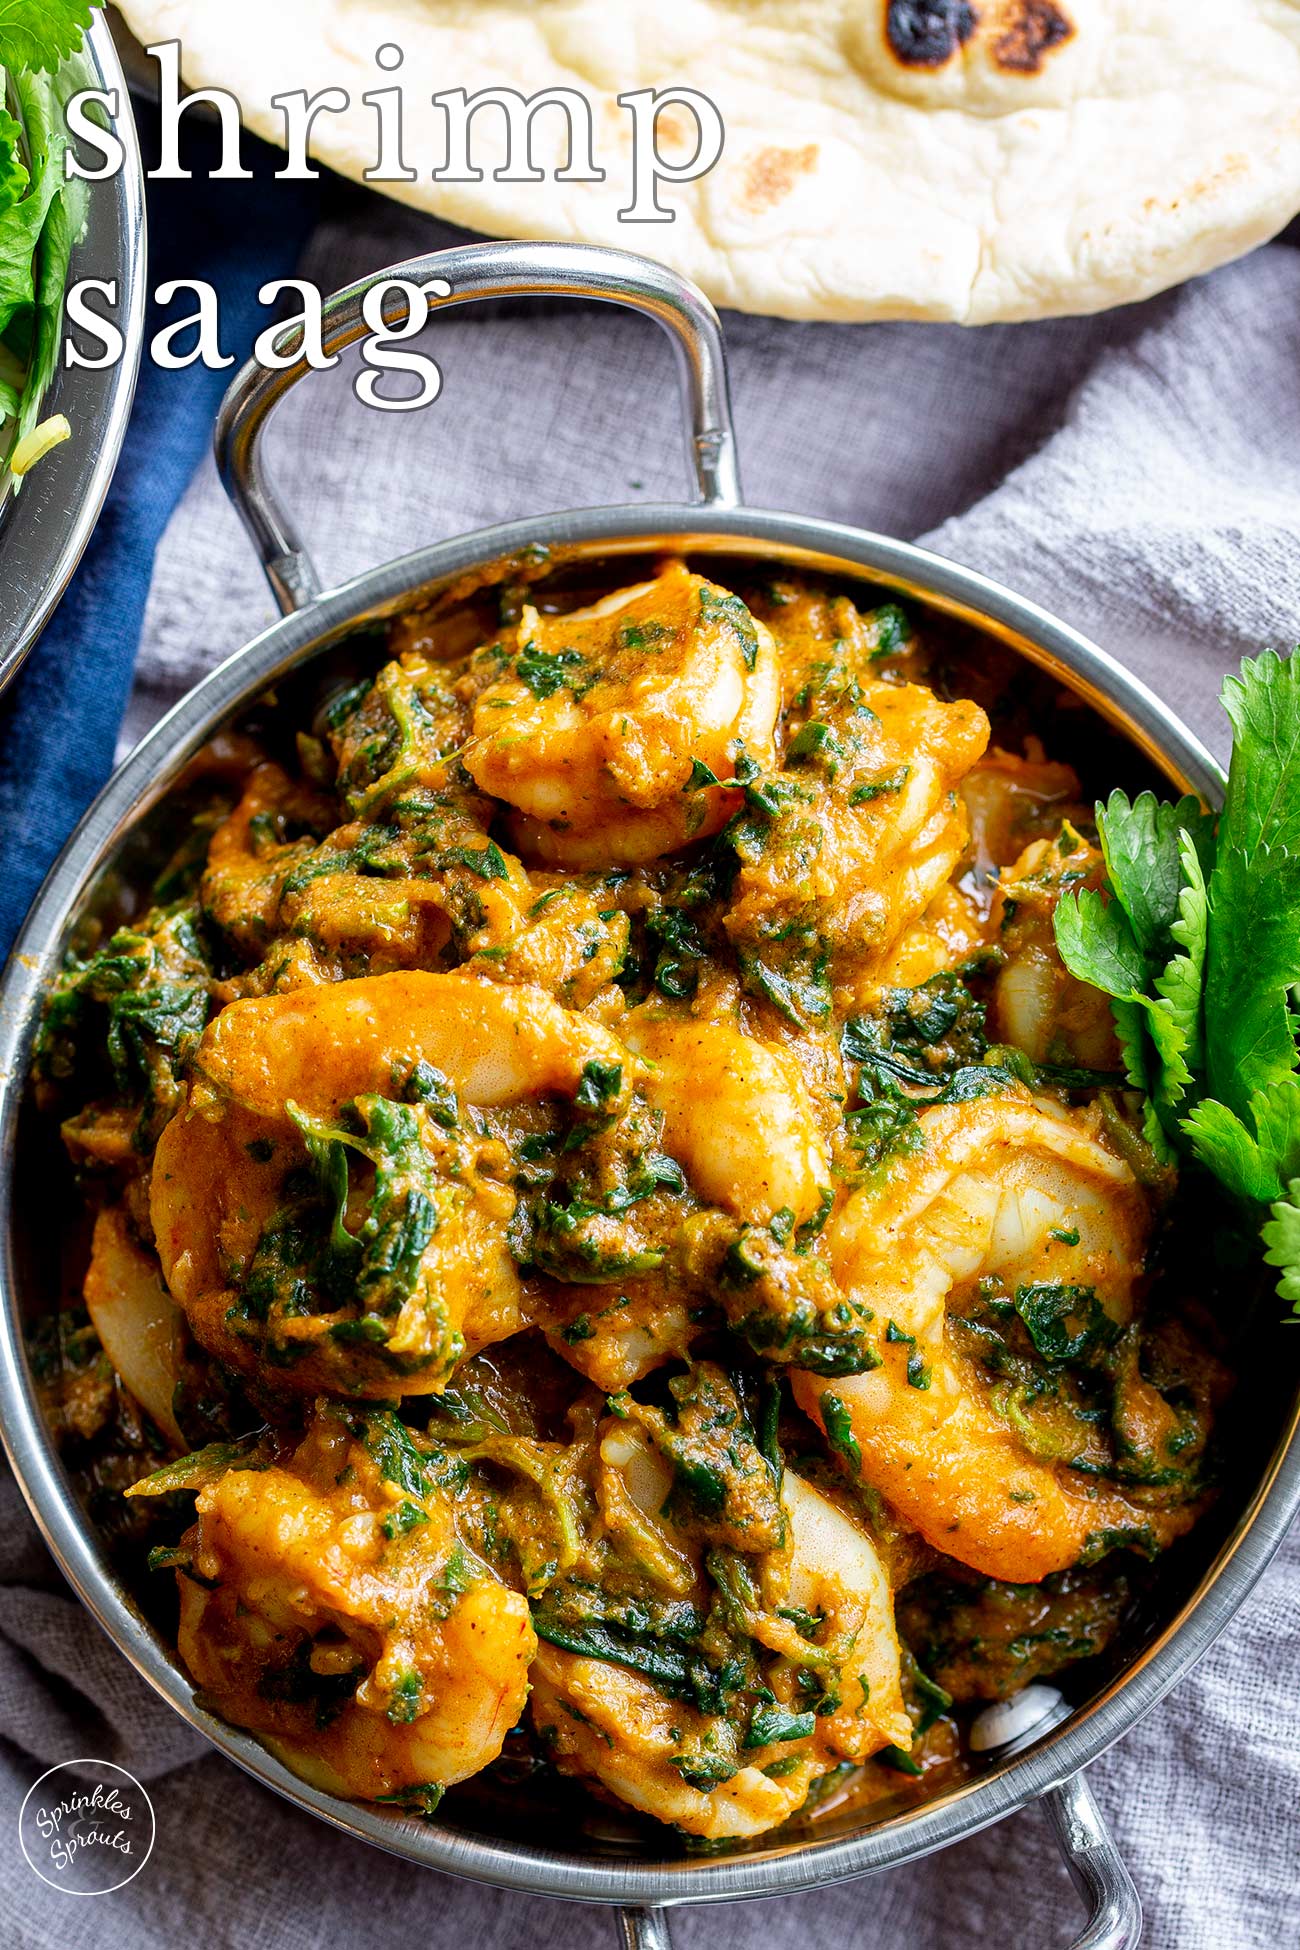 pin image: shrimp saag in a silver dish with text overlaid